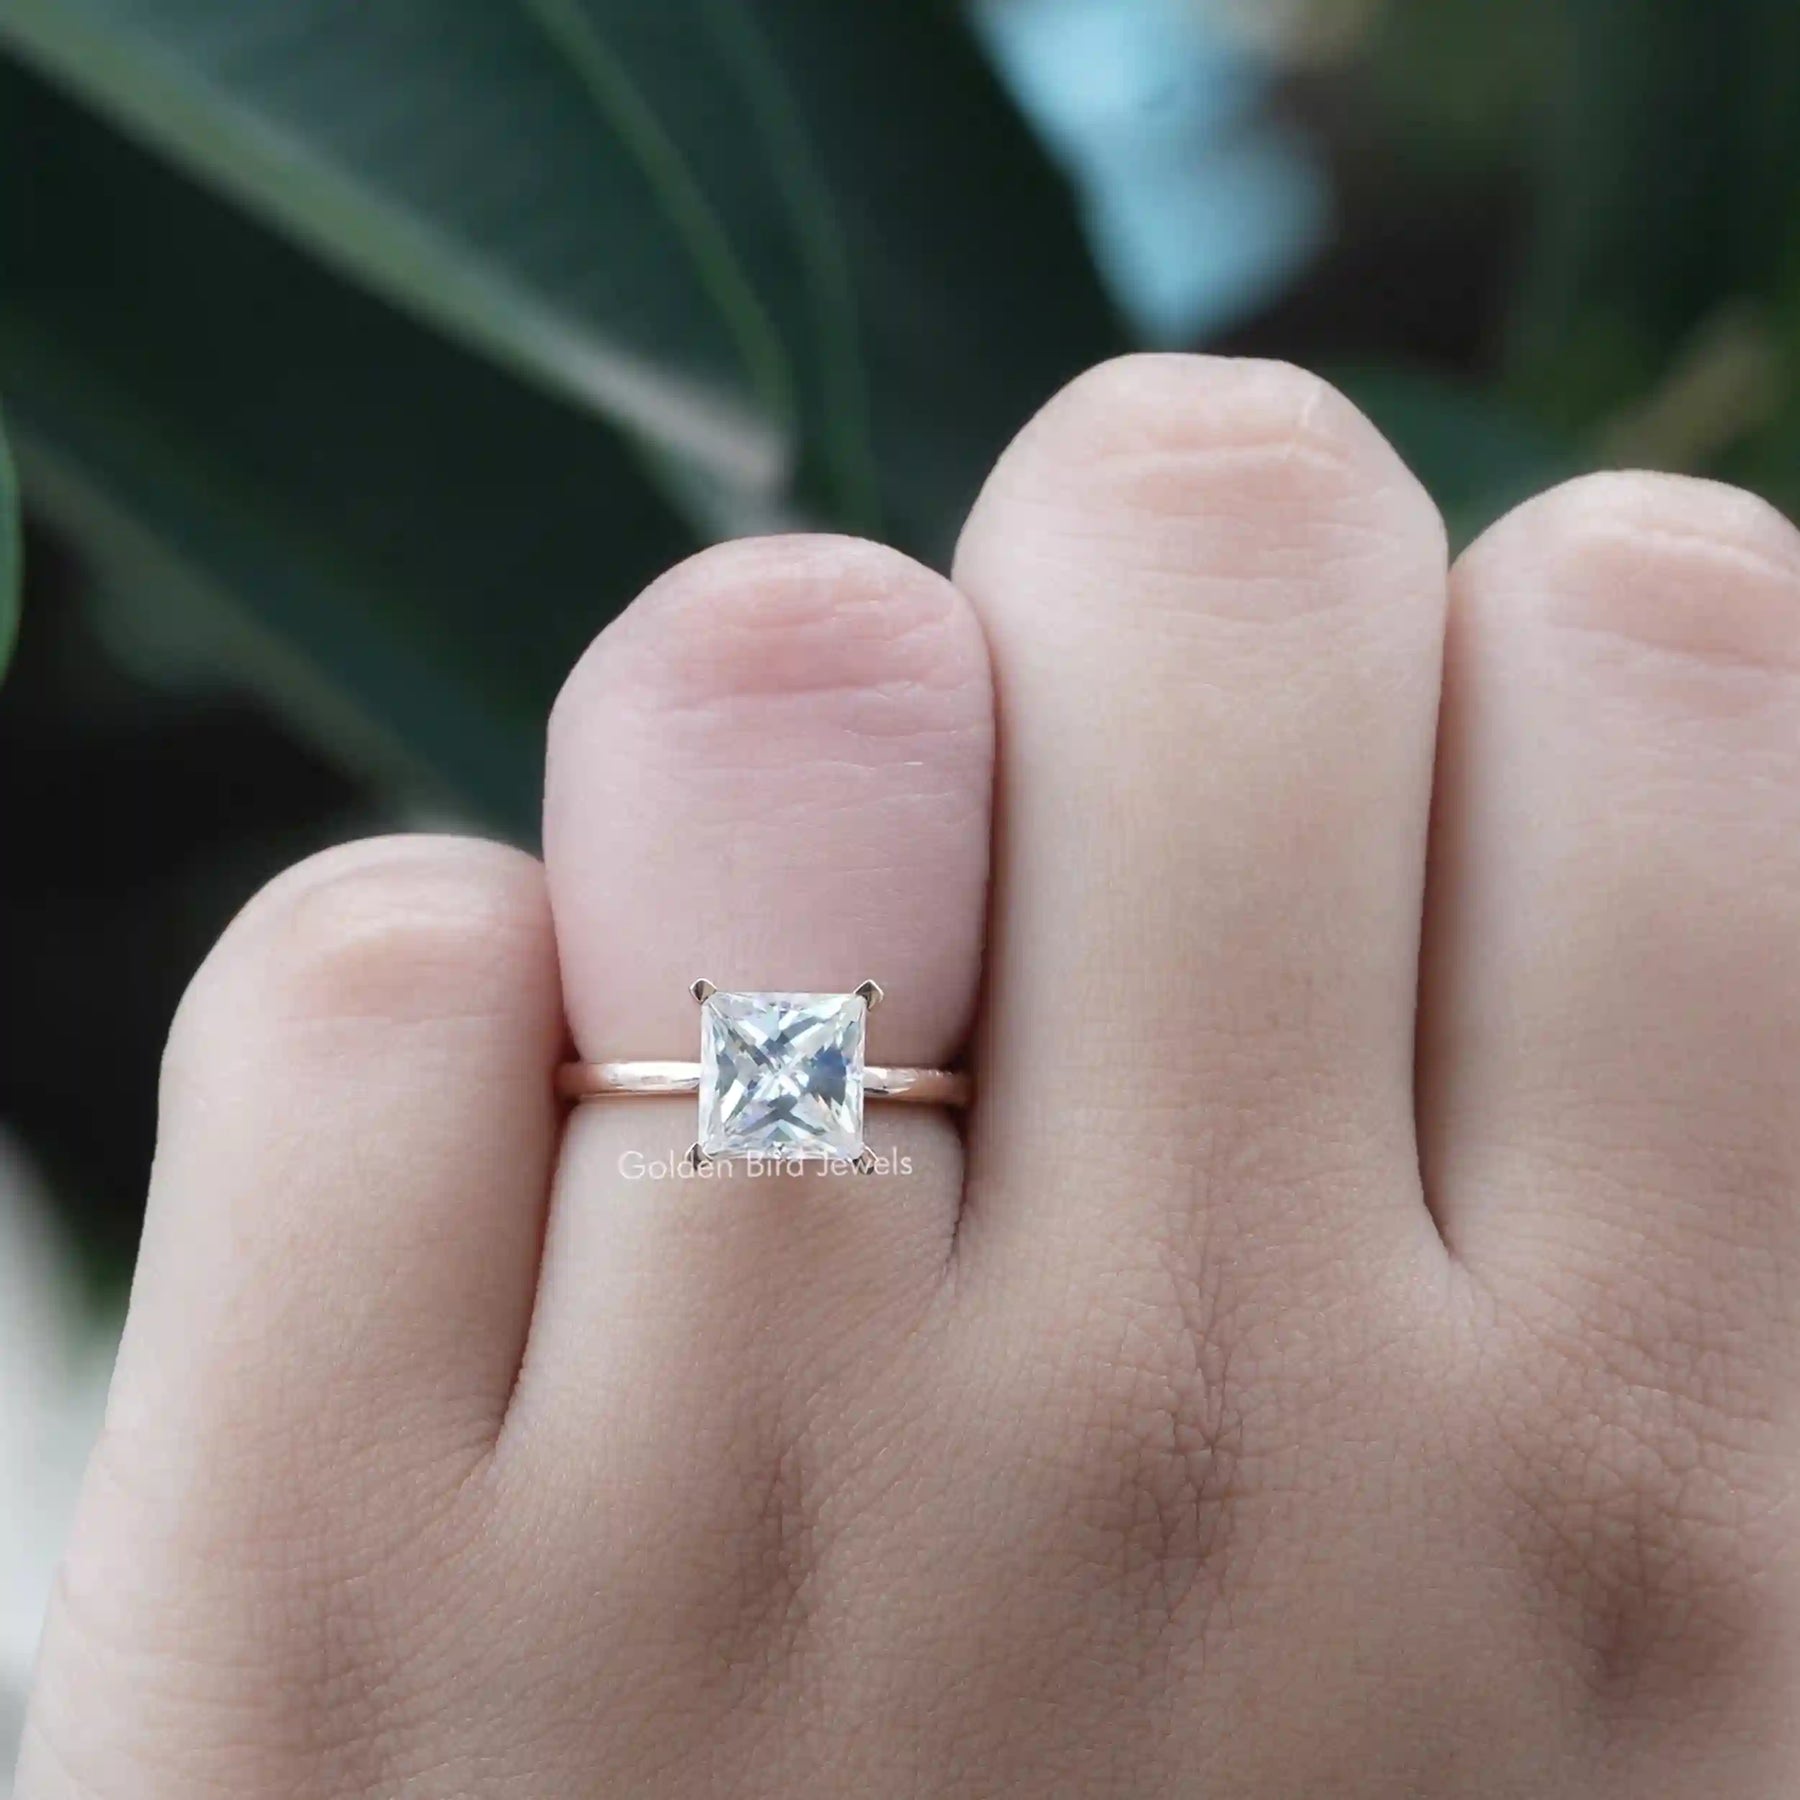 [Solitaire Princess Cut Moissanite Ring In Prong Setting]-[Golden Bird Jewels]